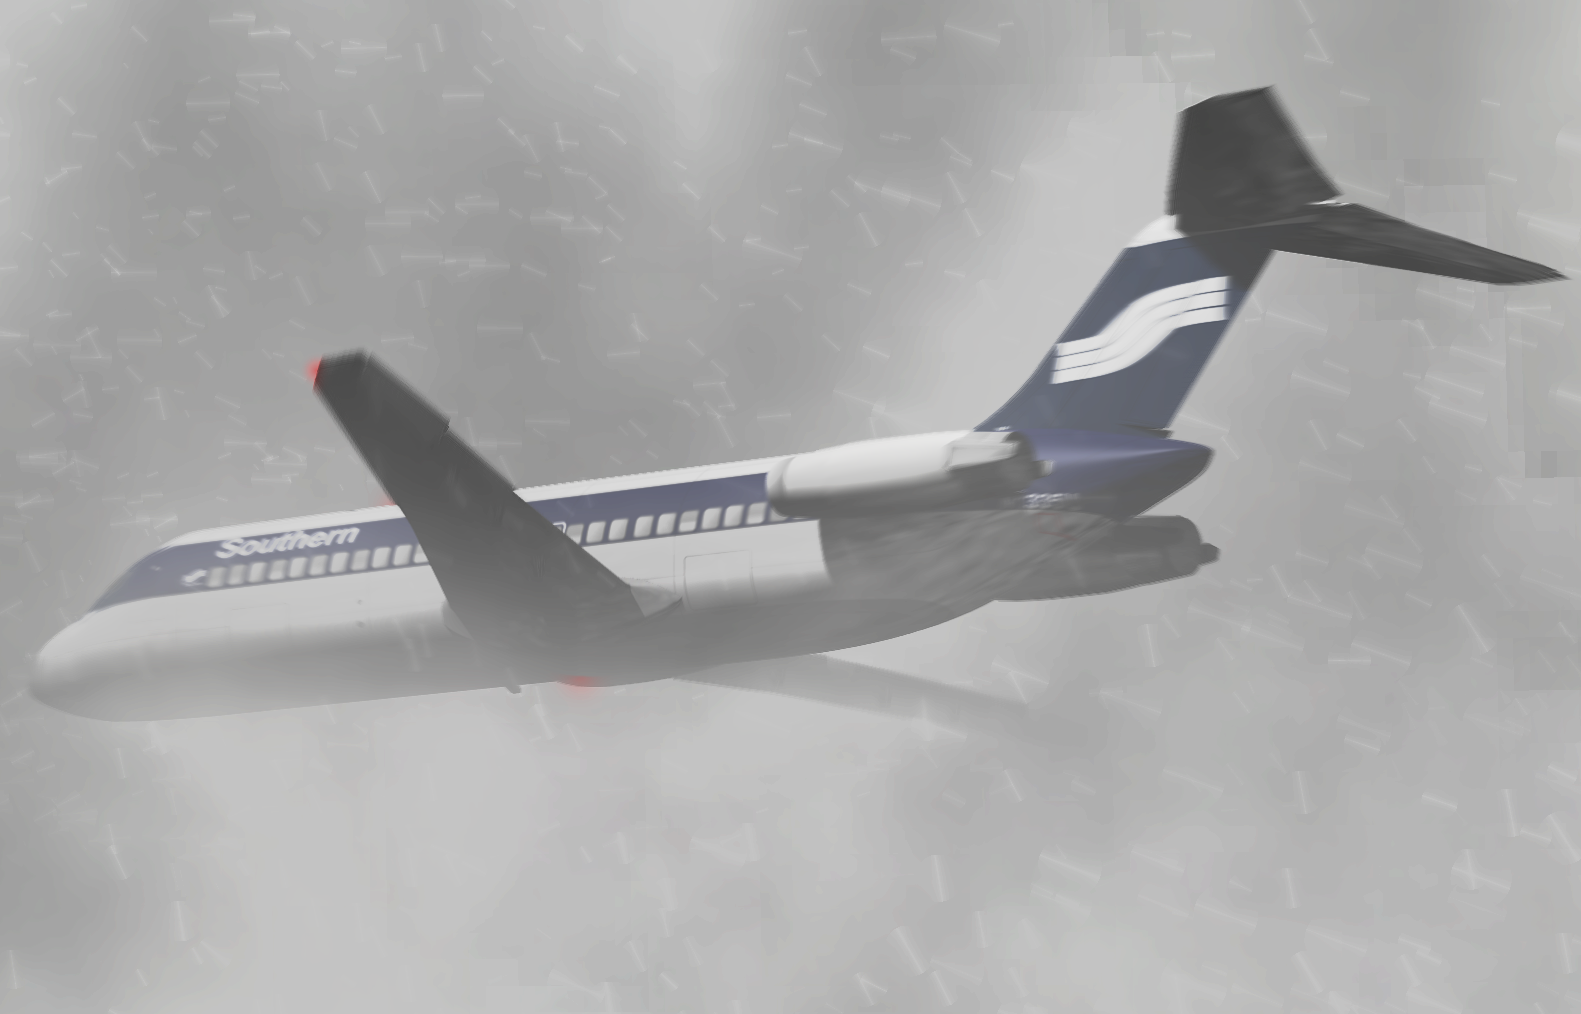 Southern Airlines flight 242 image - into the storm